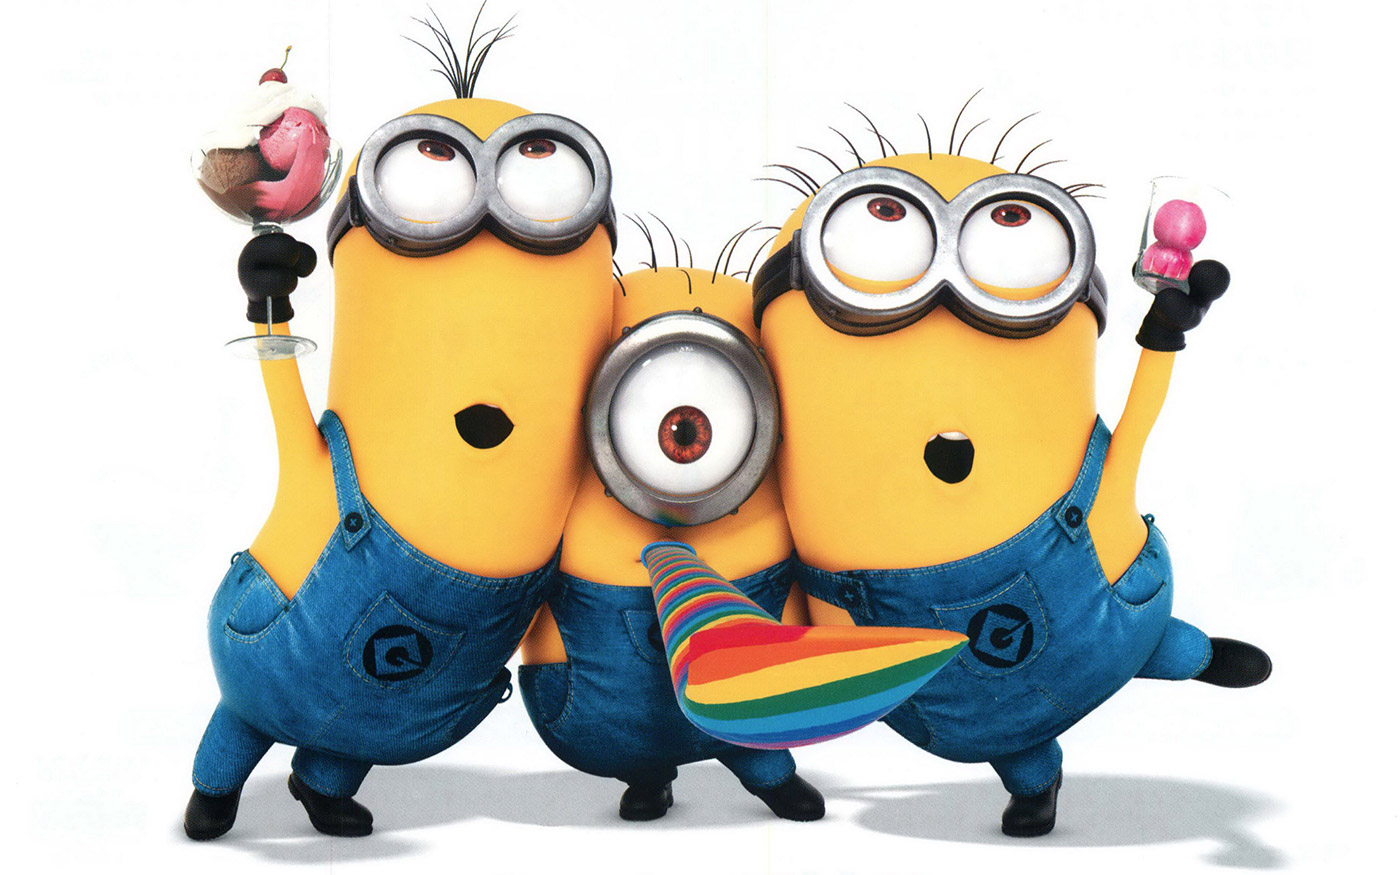 Launch Day POS, Merchandising & Stock Replenishment For Despicable Me 2 Film Launch